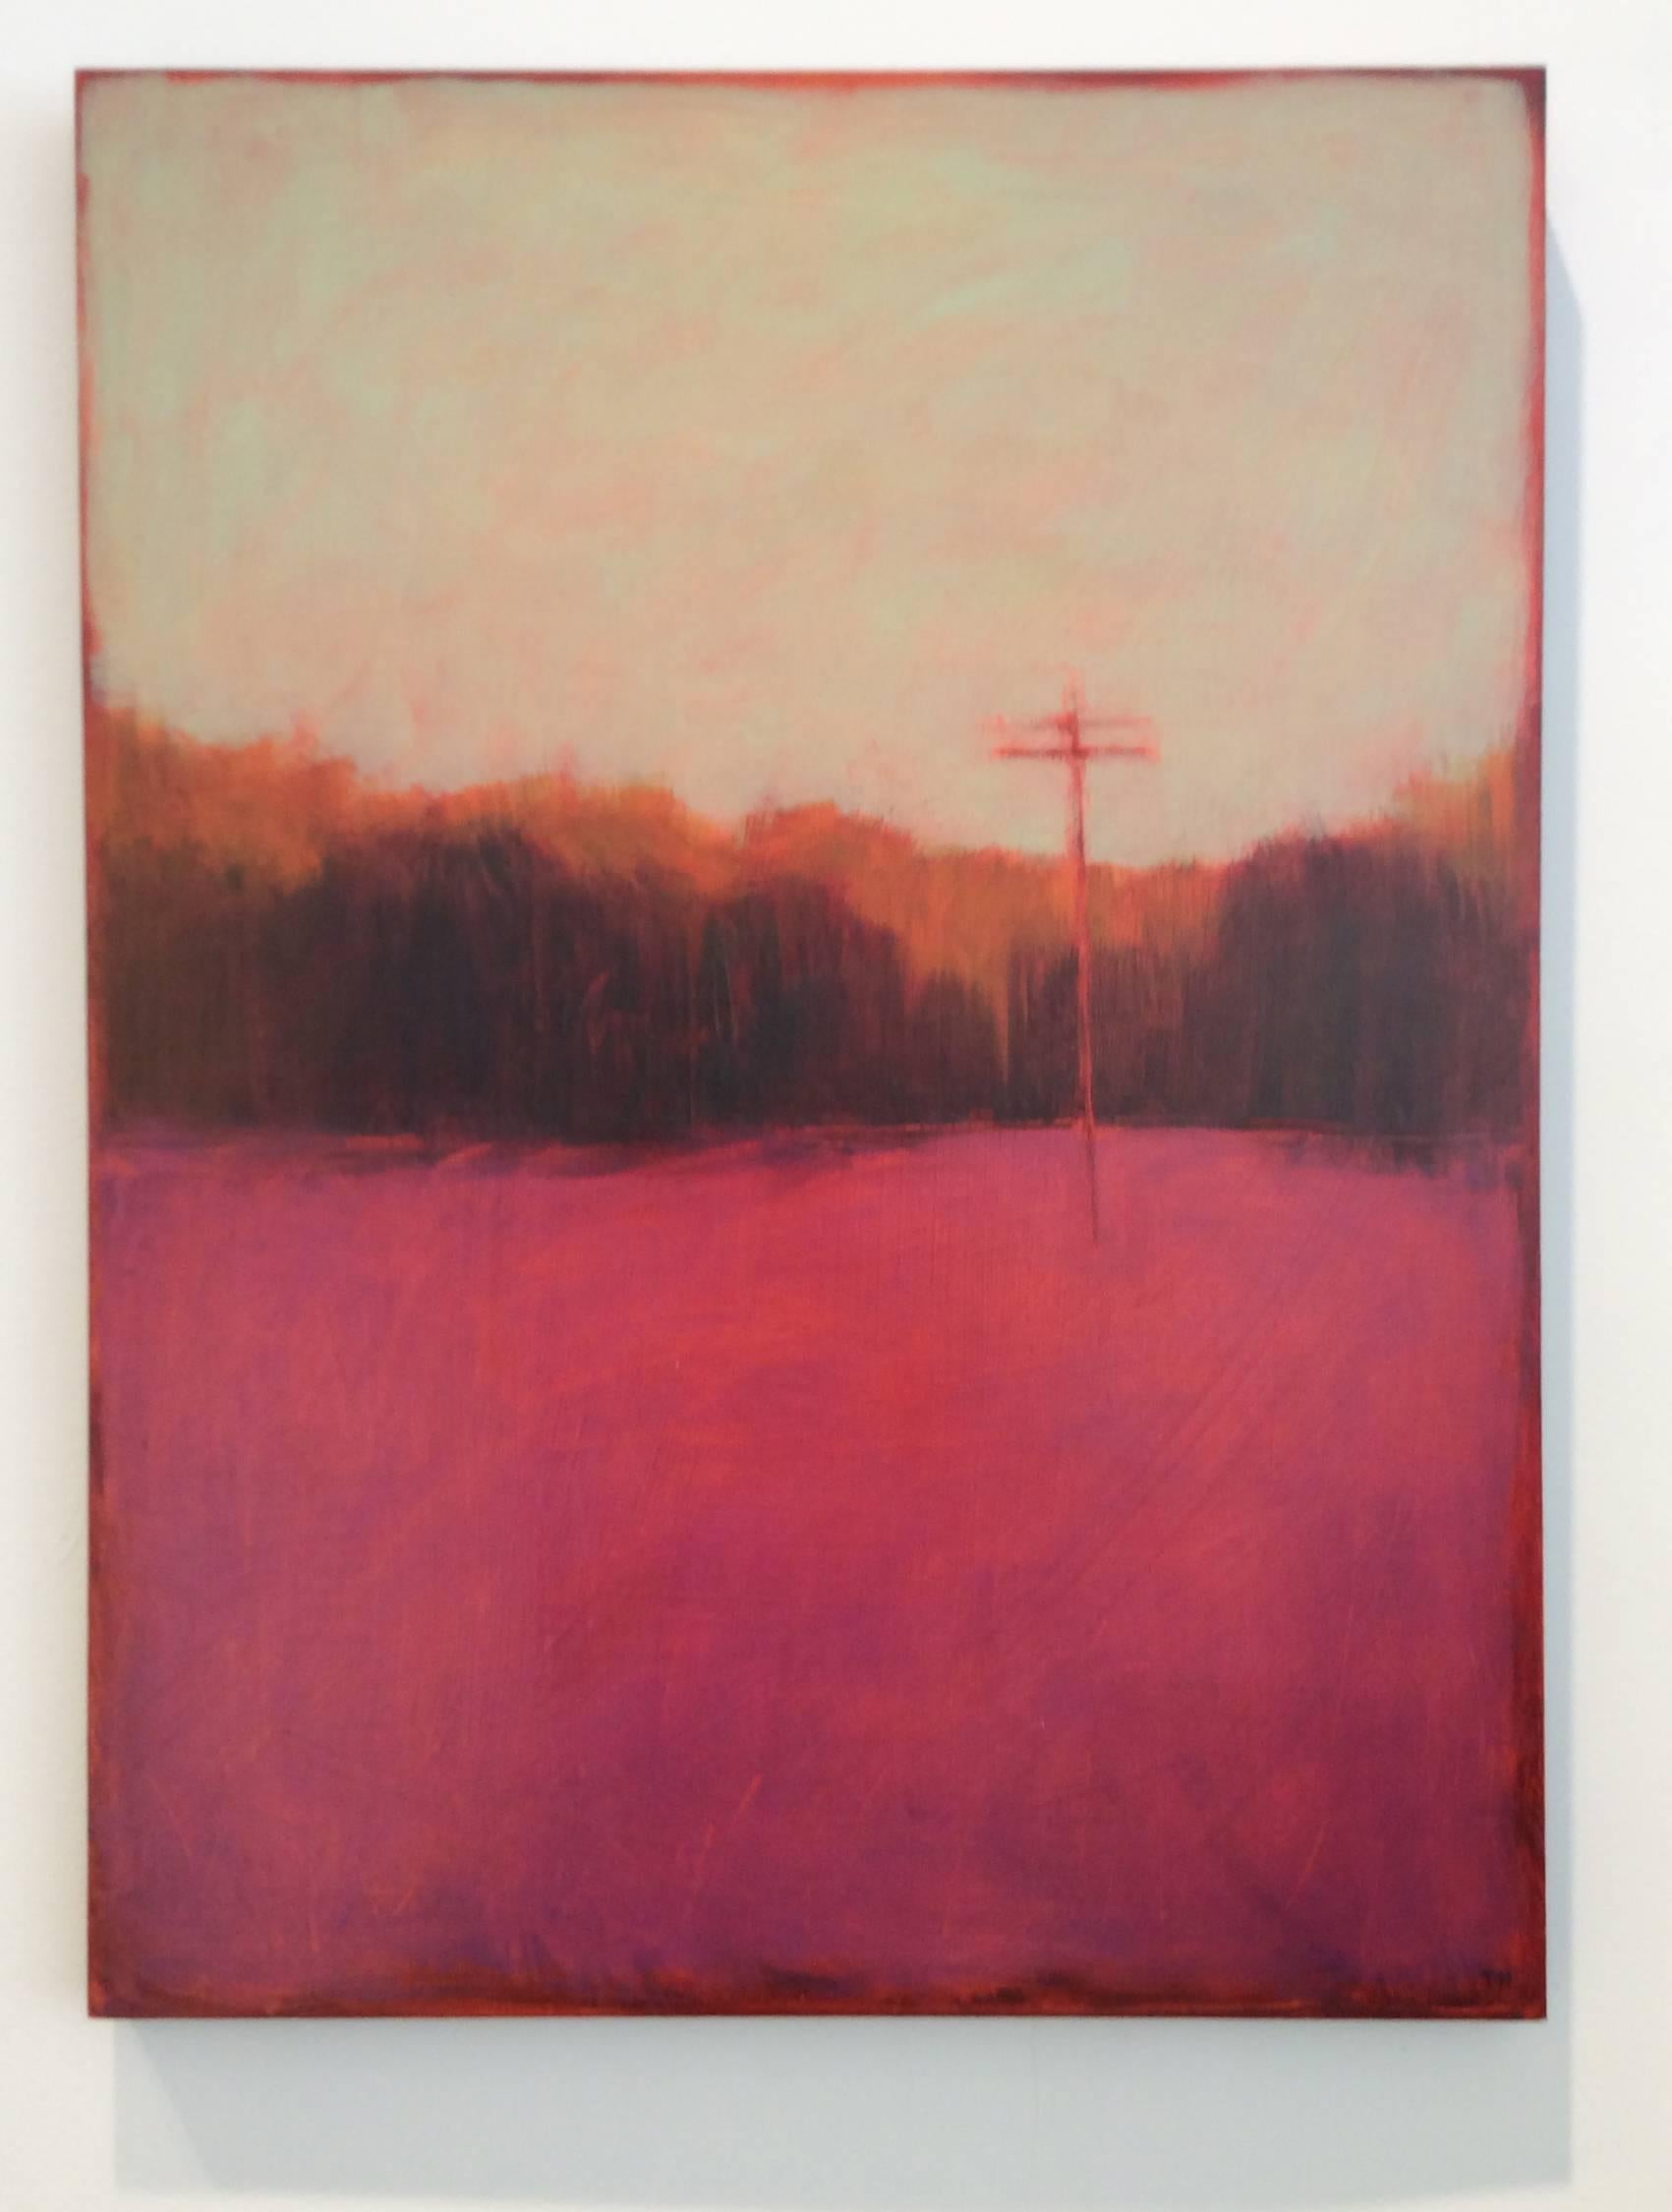 Communications (Contemporary Landscape of Bold Pink Field and Telephone Line) - Painting by Tracy Helgeson